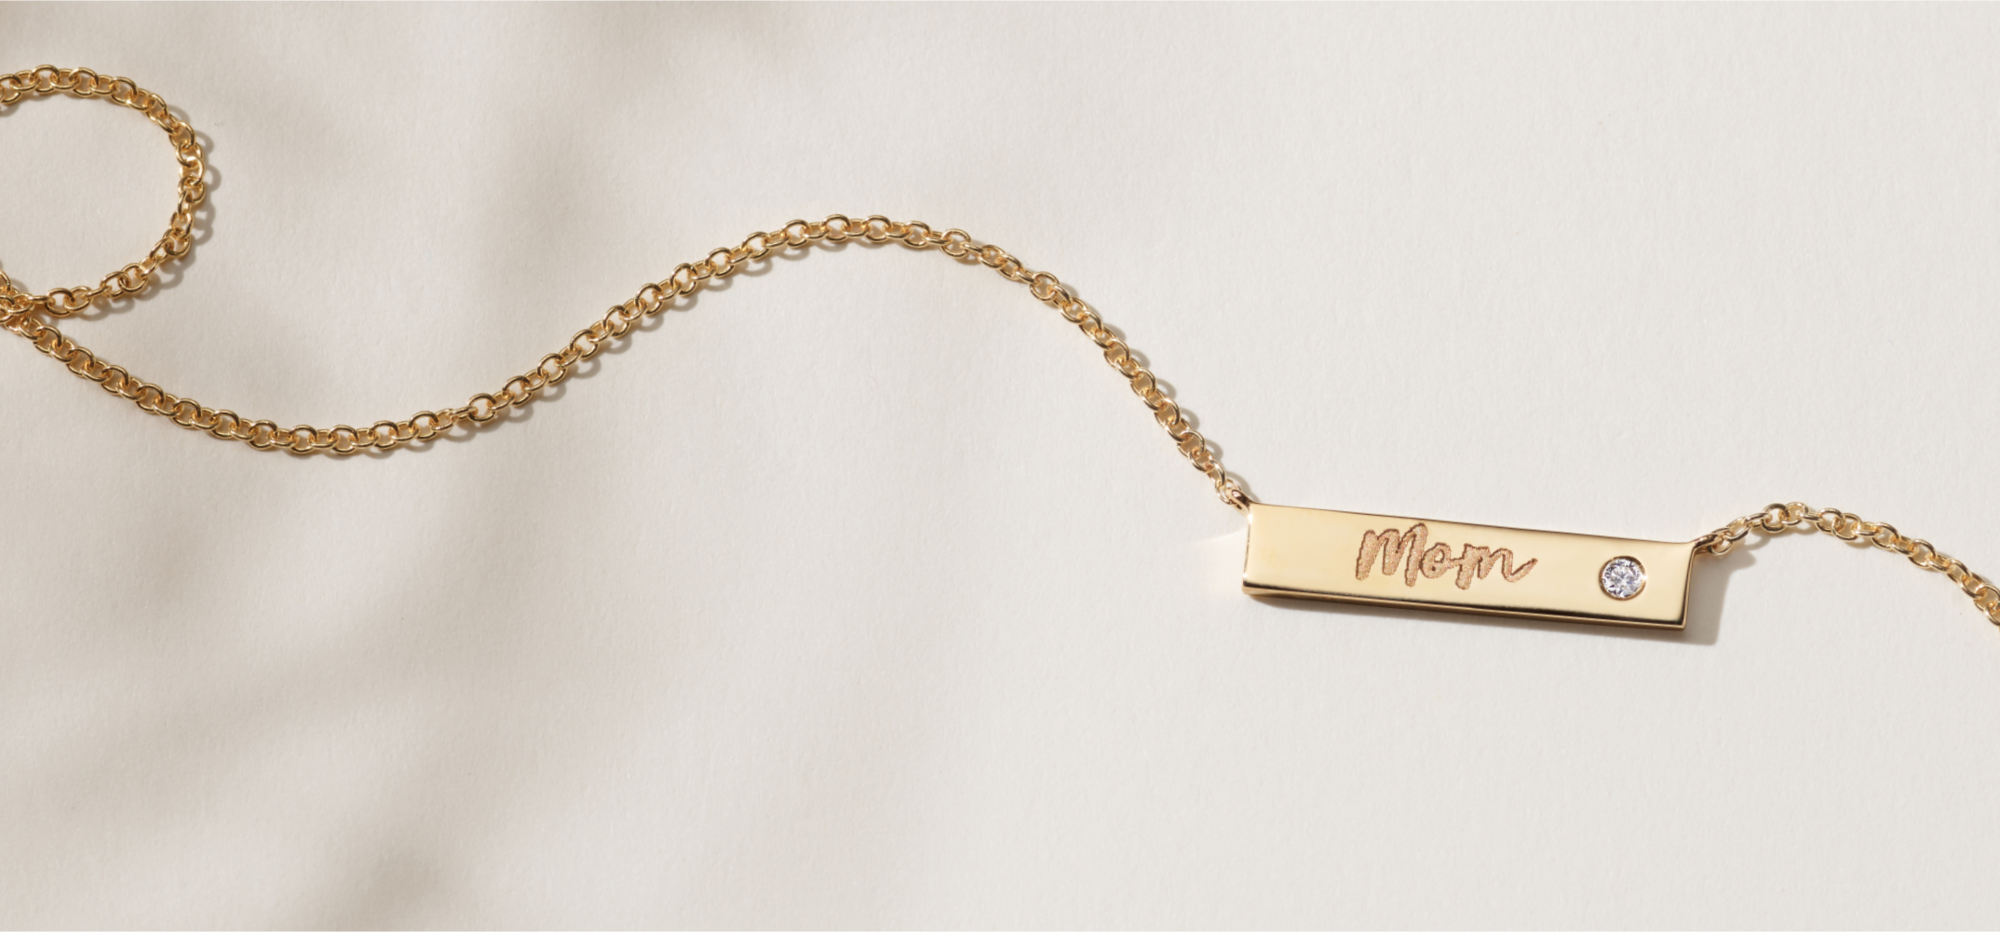 An engraved bar necklace with a single diamond